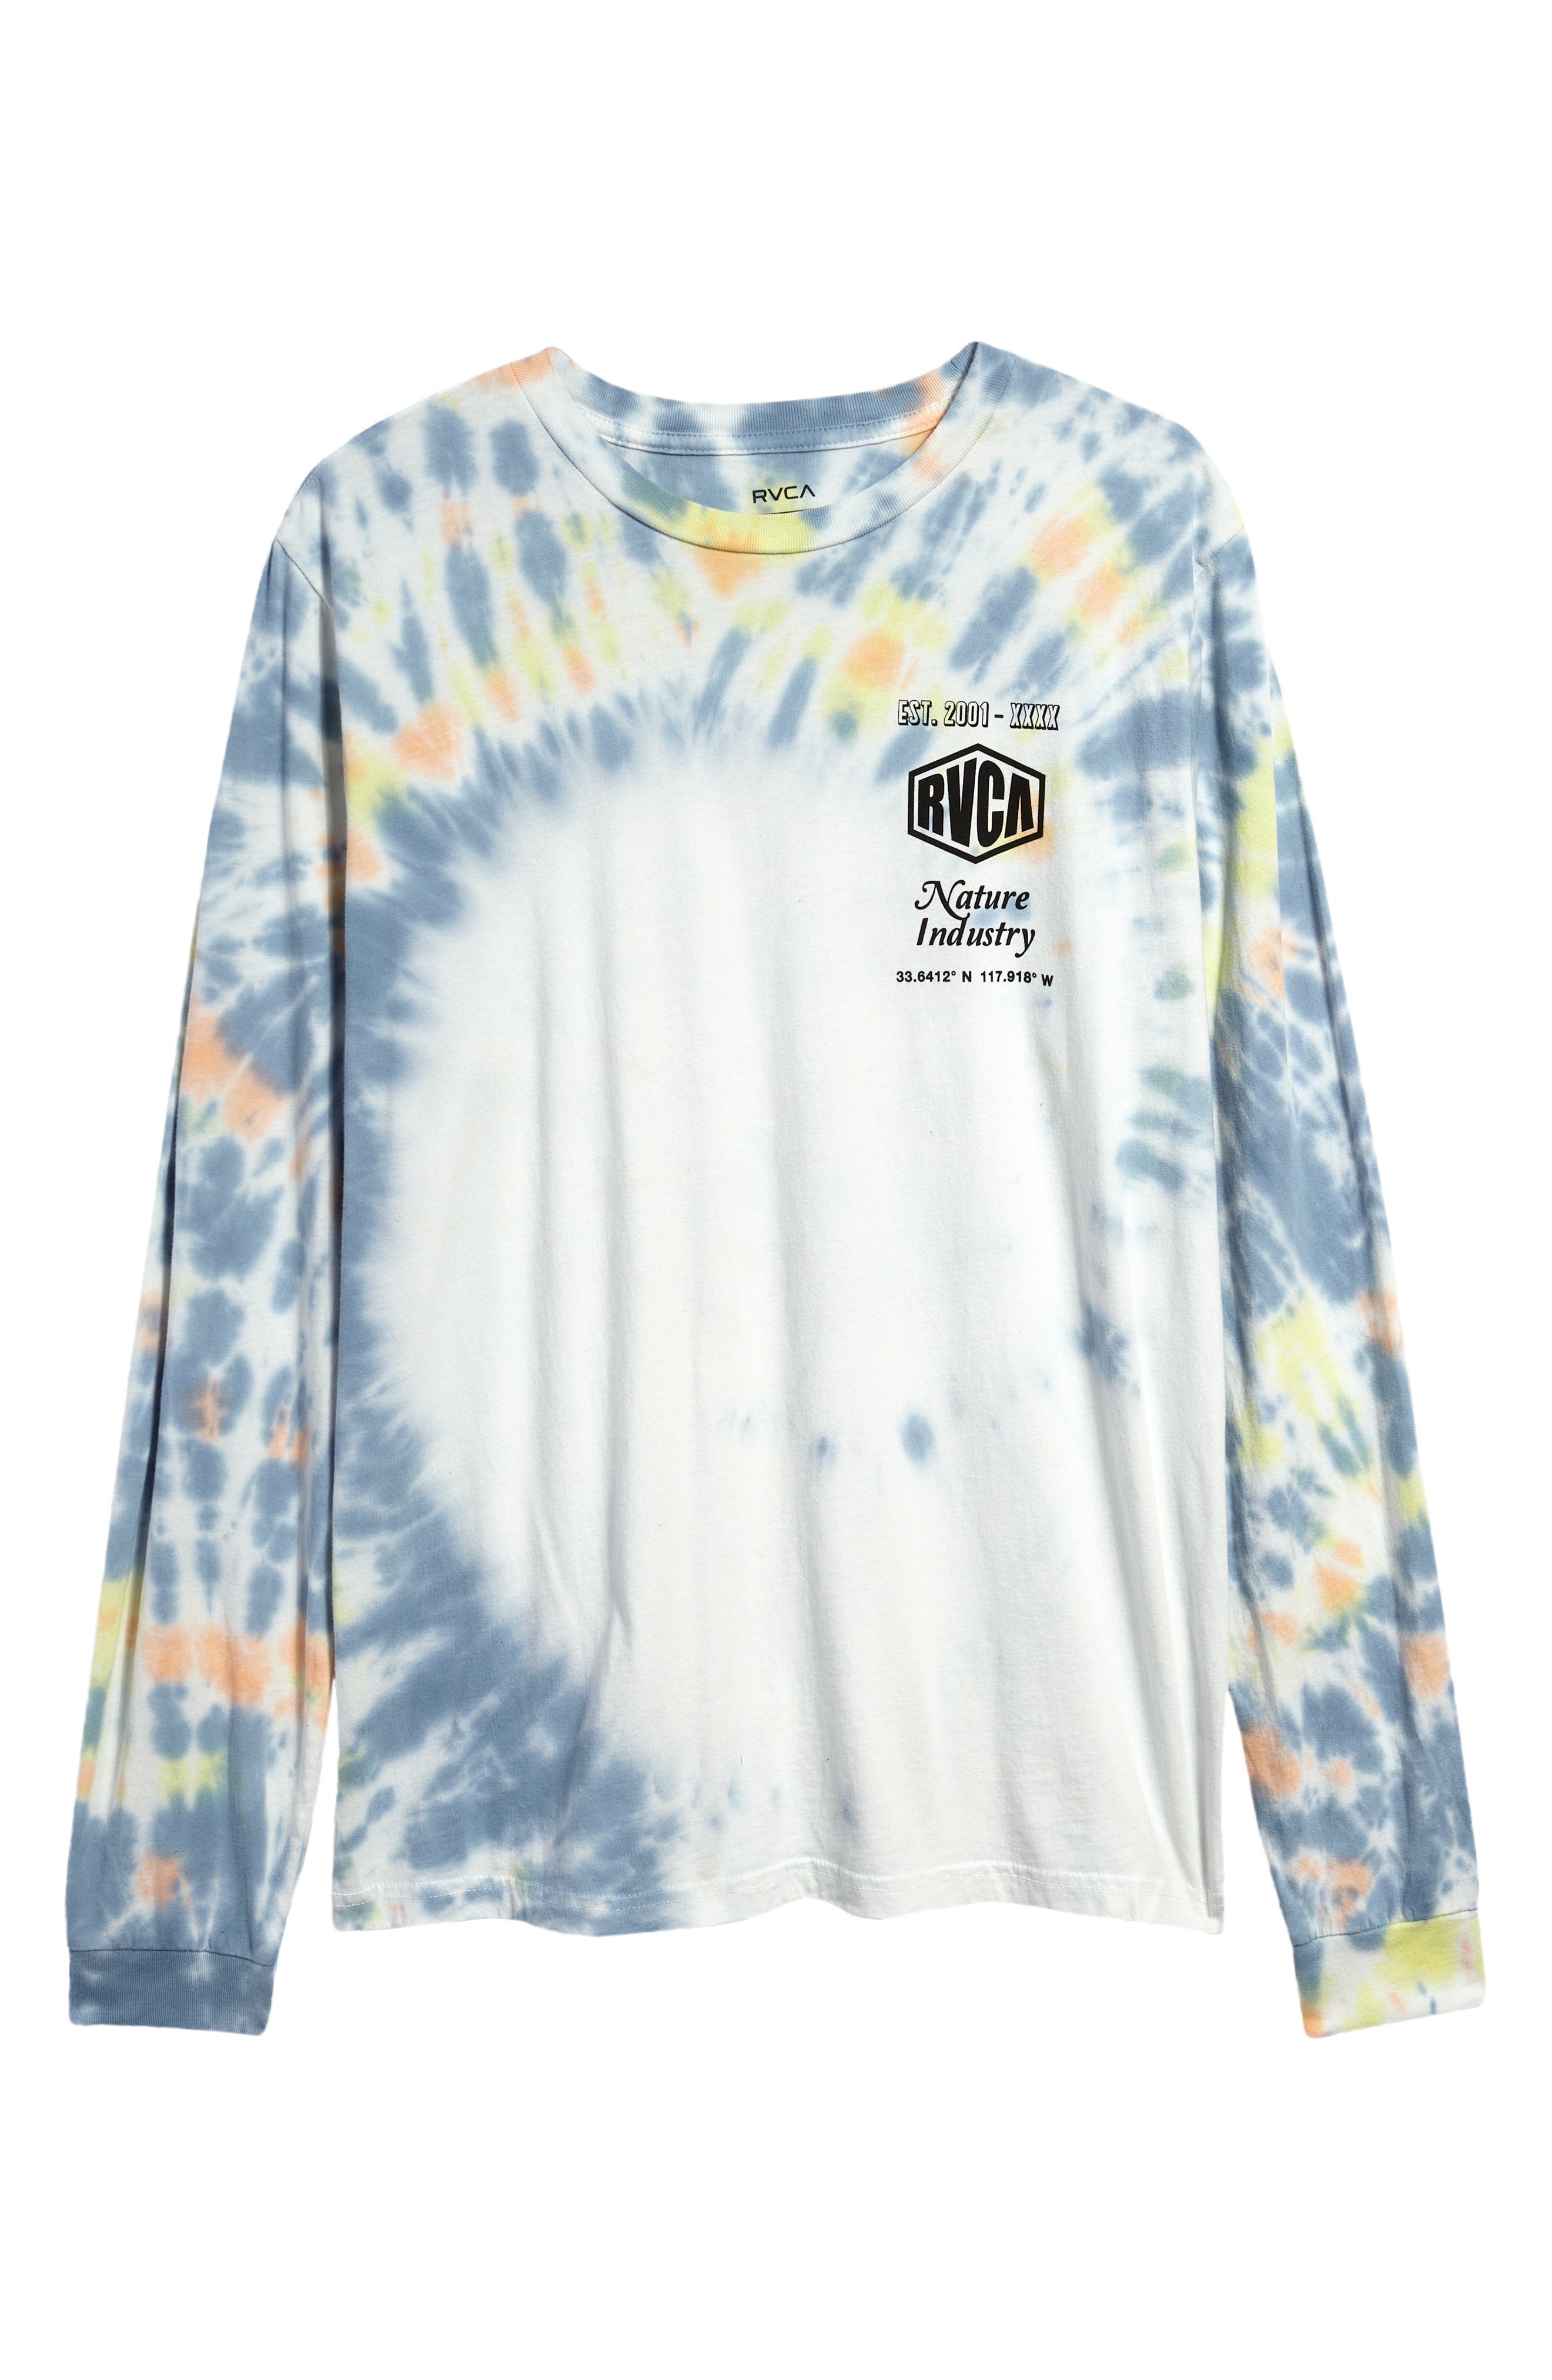 Famulily Womens Tie Dye Tops Long Sleeve Cotton Round Neck T Shirts S-2XL 